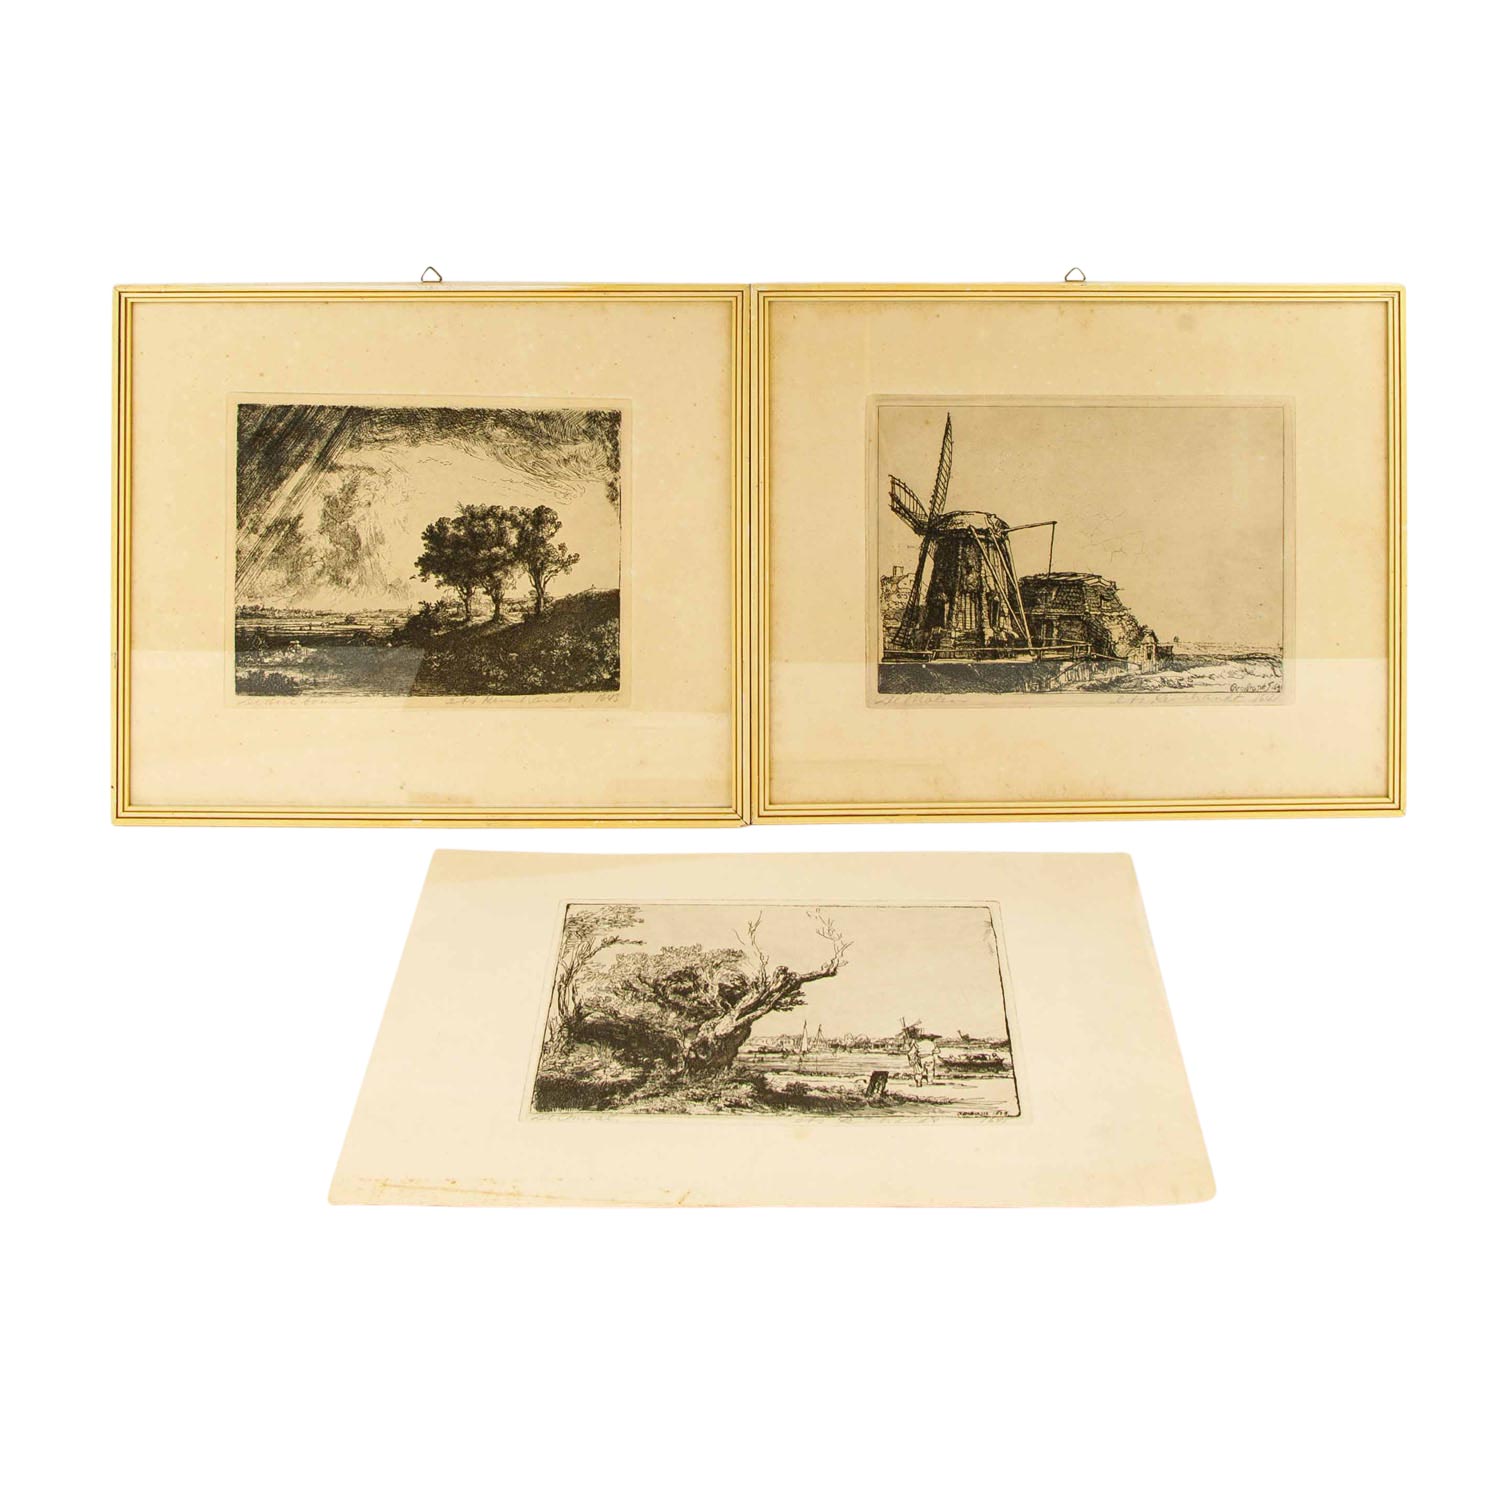 purchase　1643　1641,　AFTER　EPPLI　1645,　VAN　landscapes　1606-1669),　and　from　REMBRANDT　(R.:　RIJN,　online